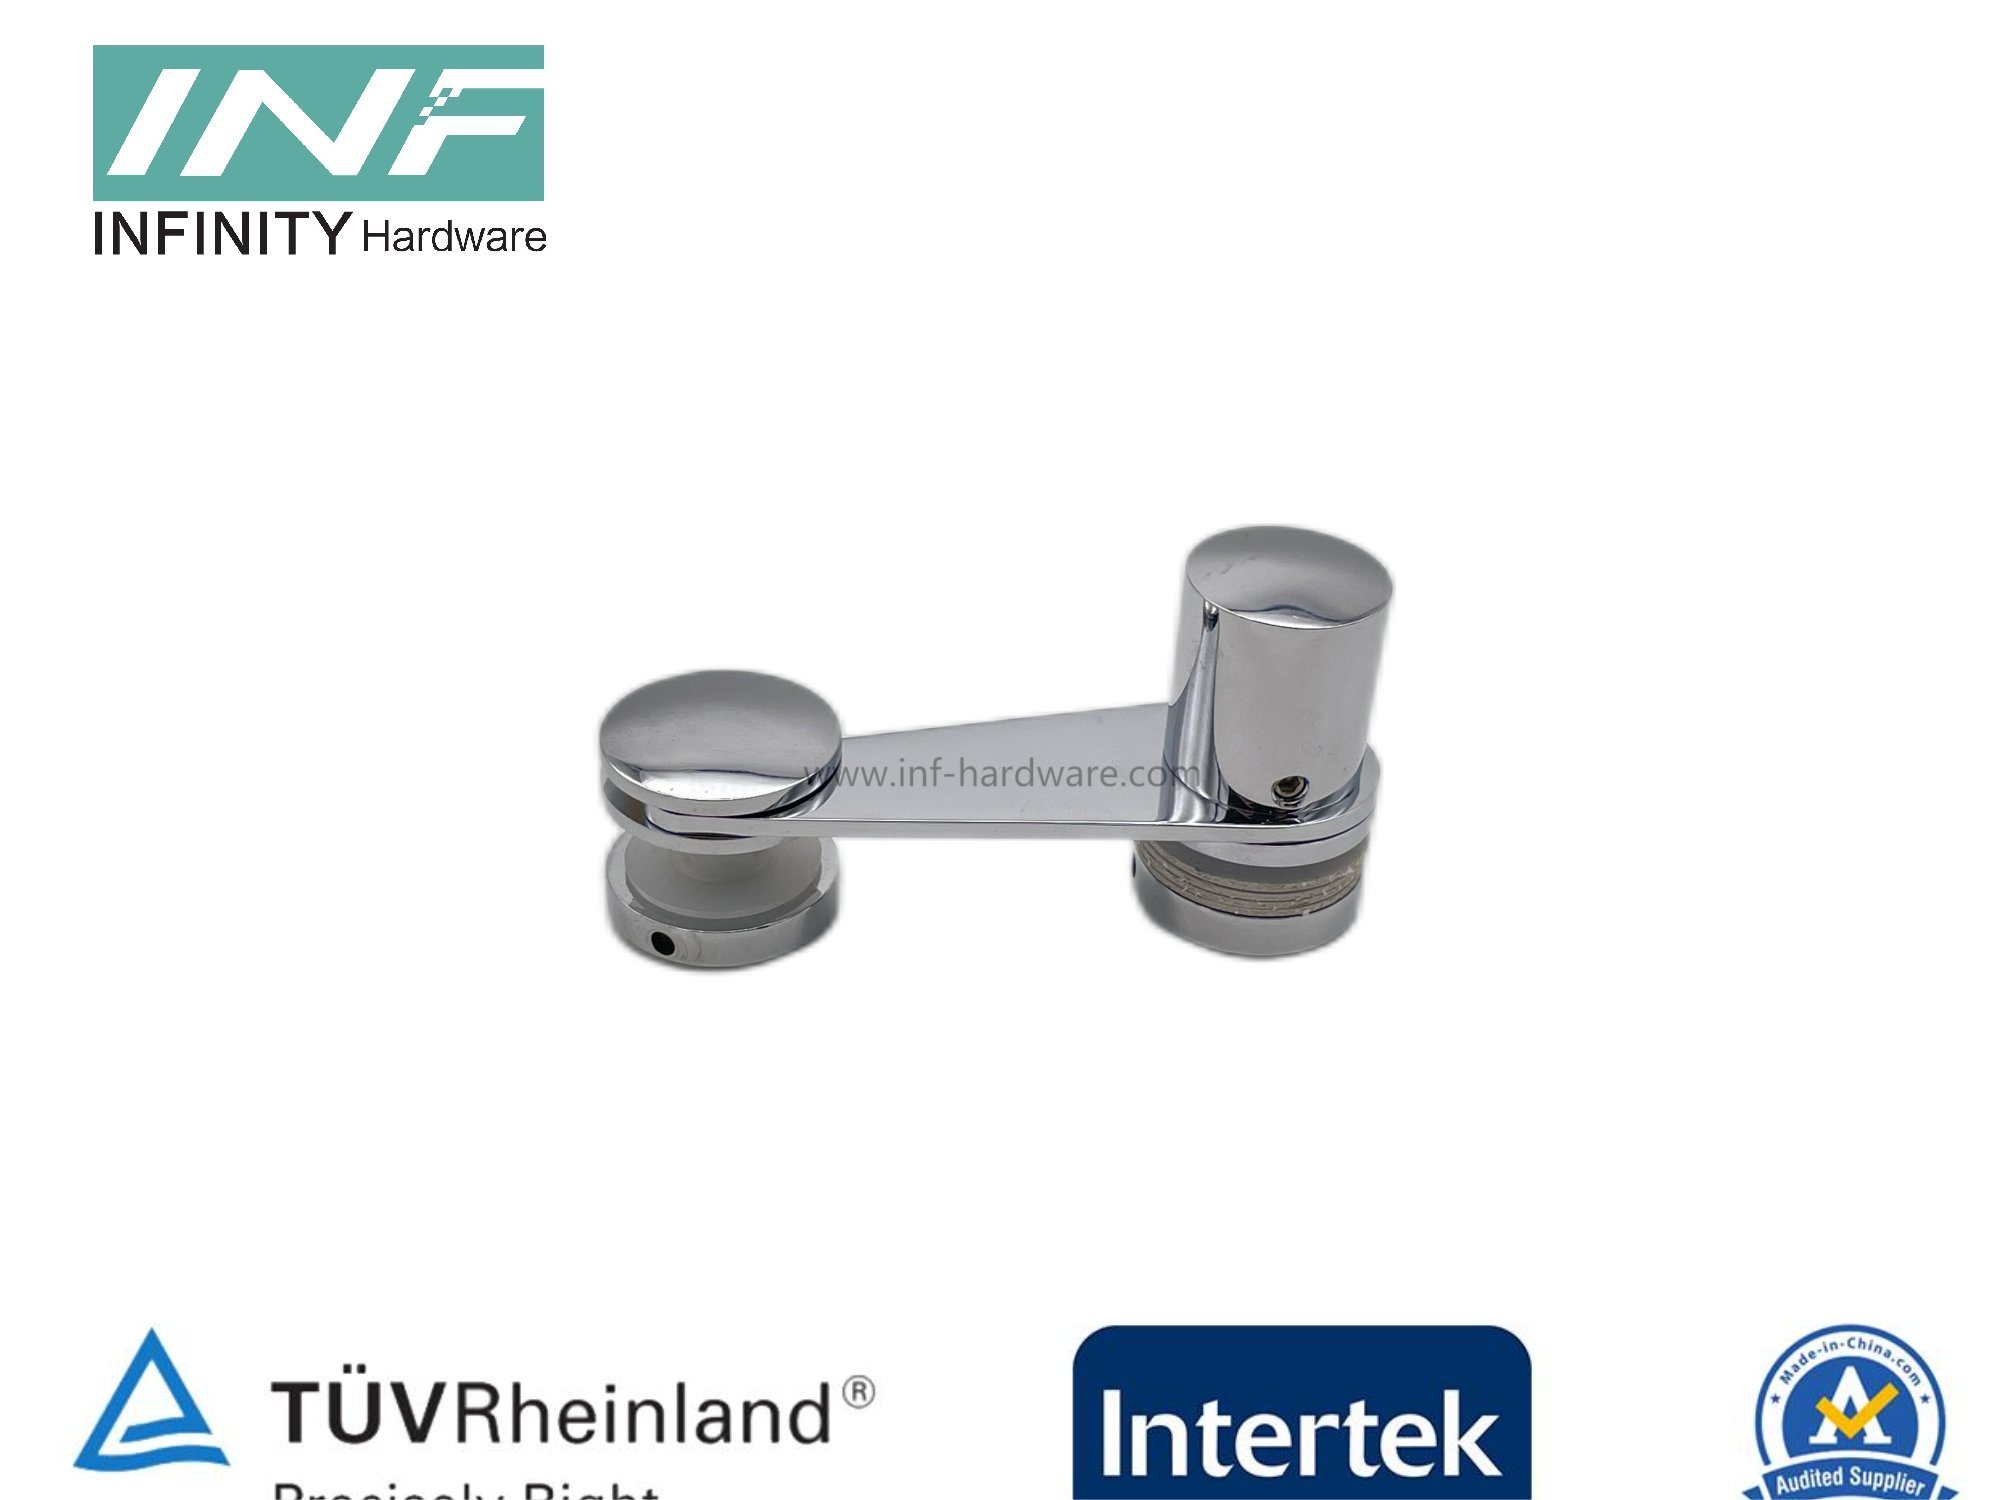 180° Glass to Glass Brass/Stainless Steel Latch Lock with Knob for Shower Room and Glass Door